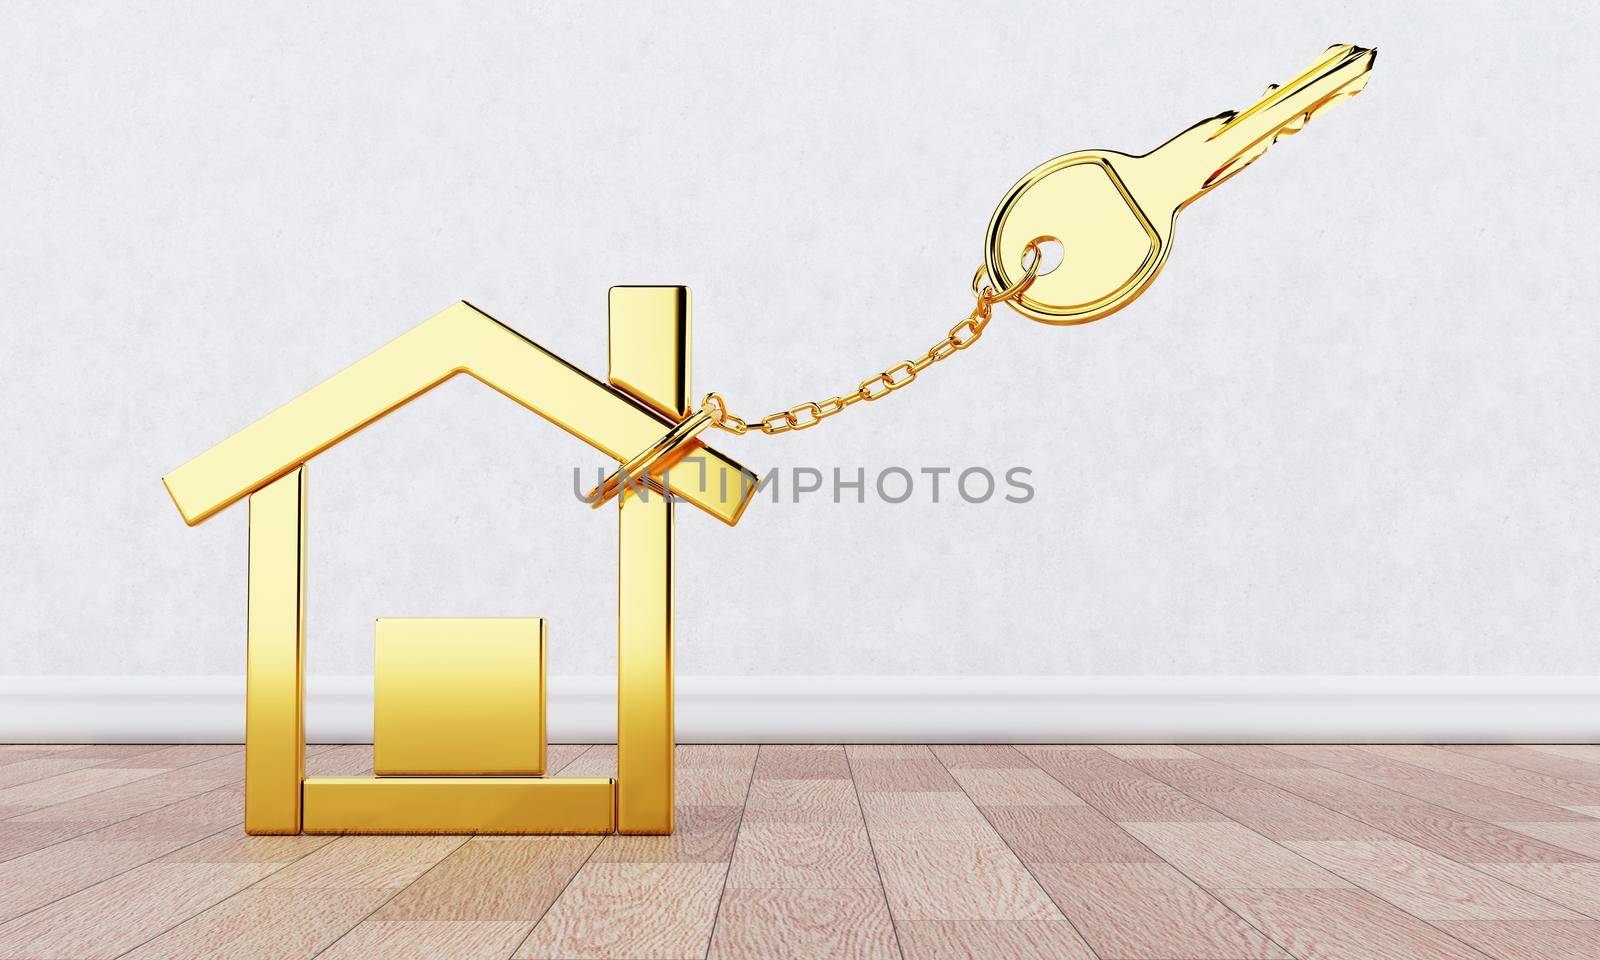 Gold key chain with golden modern house shape key holder on wooden floor and white wall background. Business construction and architecture concept. 3D illustration rendering